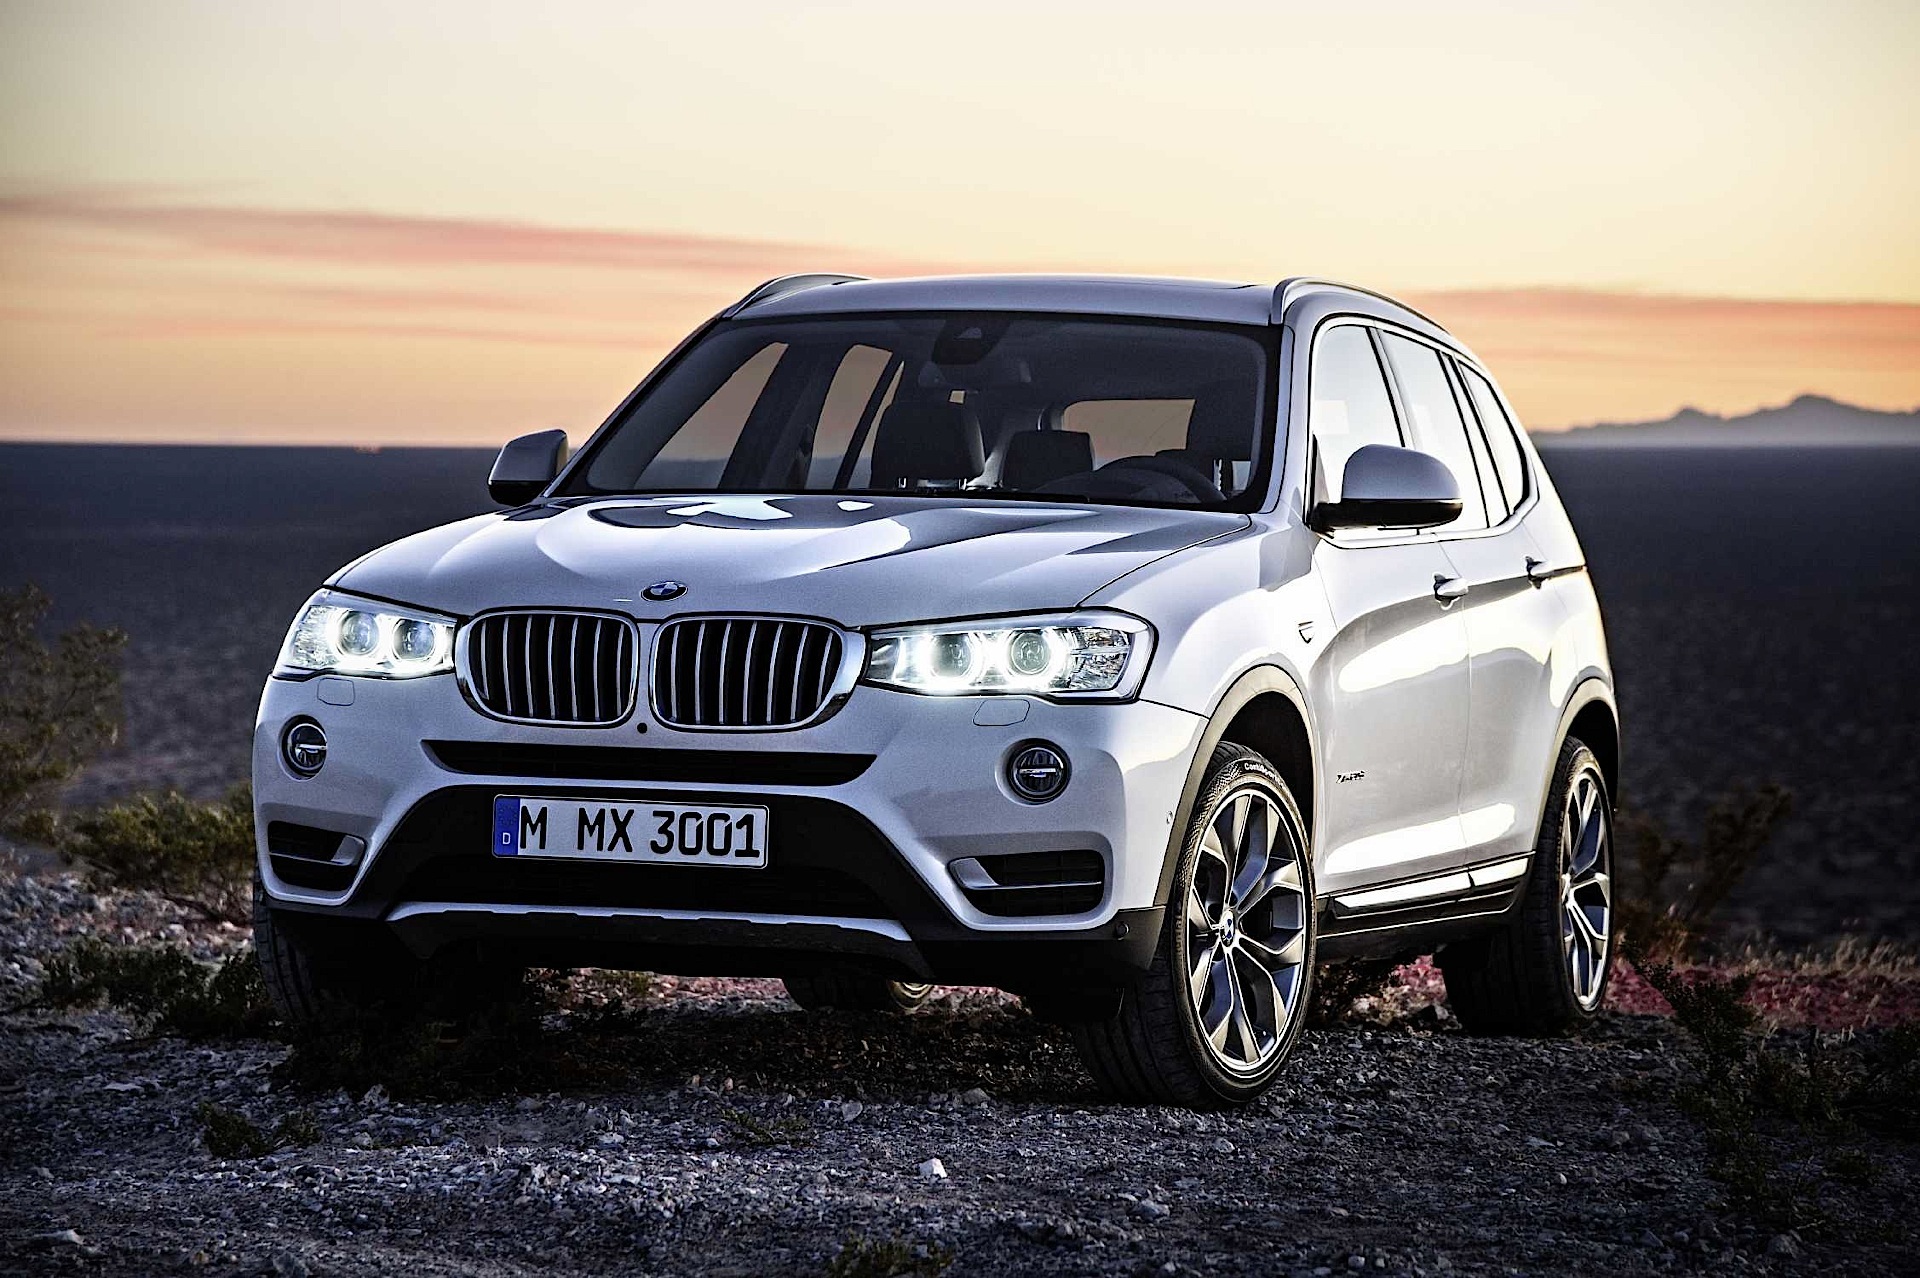 BMW X3 (F25) Photos and Specs. Photo: BMW X3 (F25) review and 25